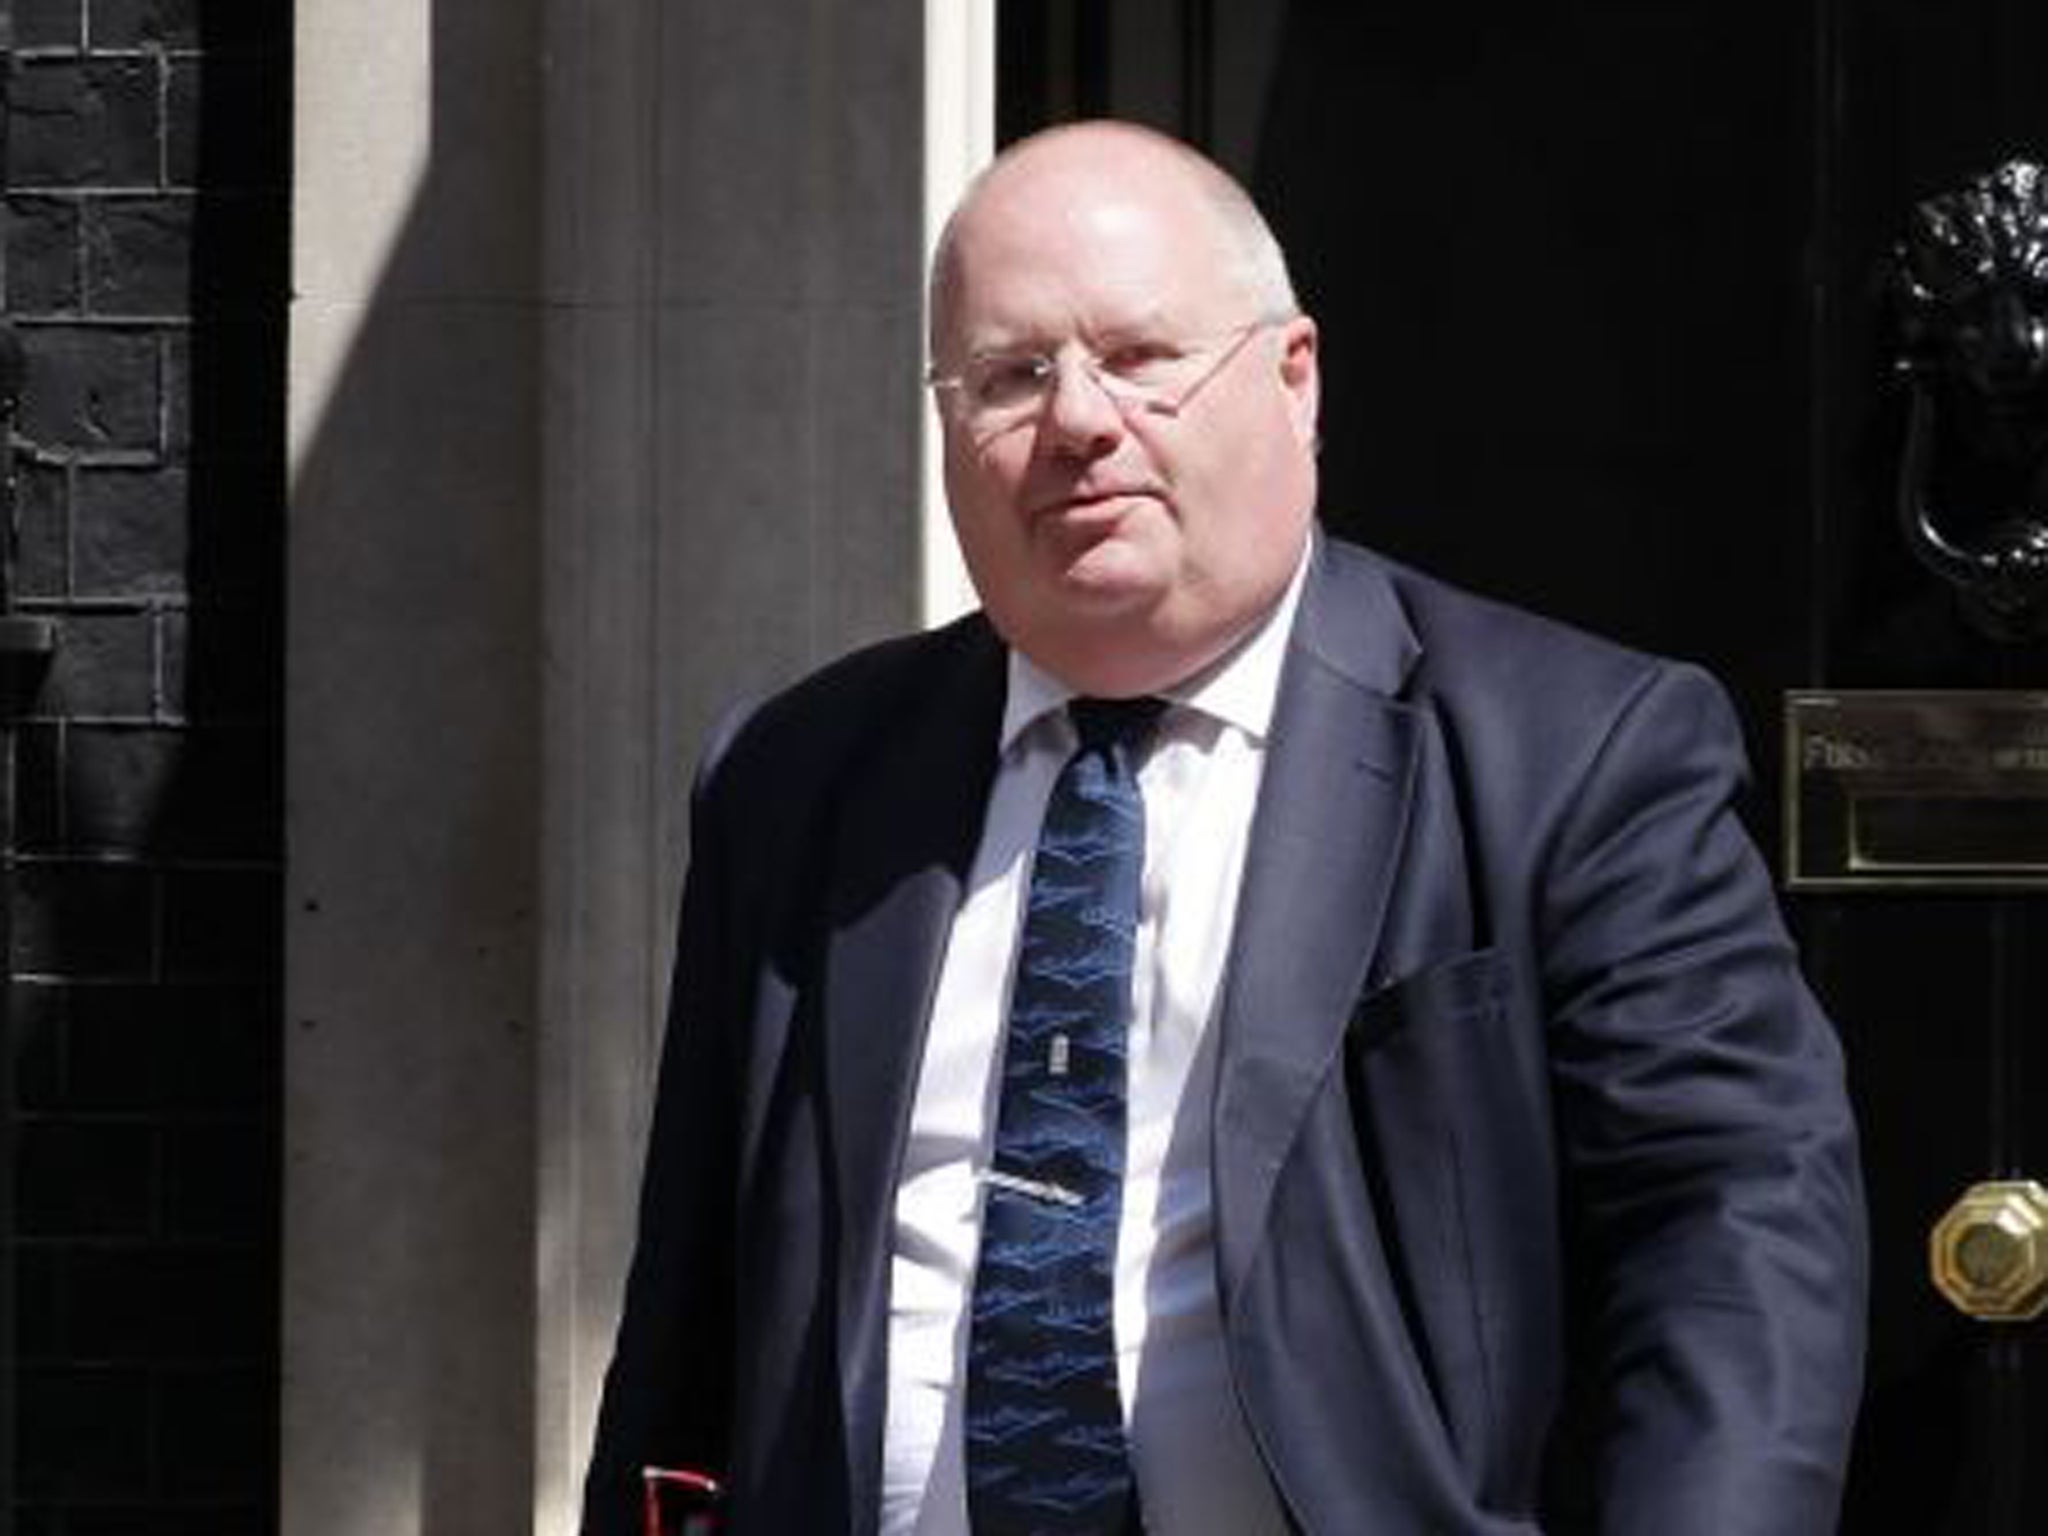 Eric Pickles: 'I was giving her a frank piece of advice'